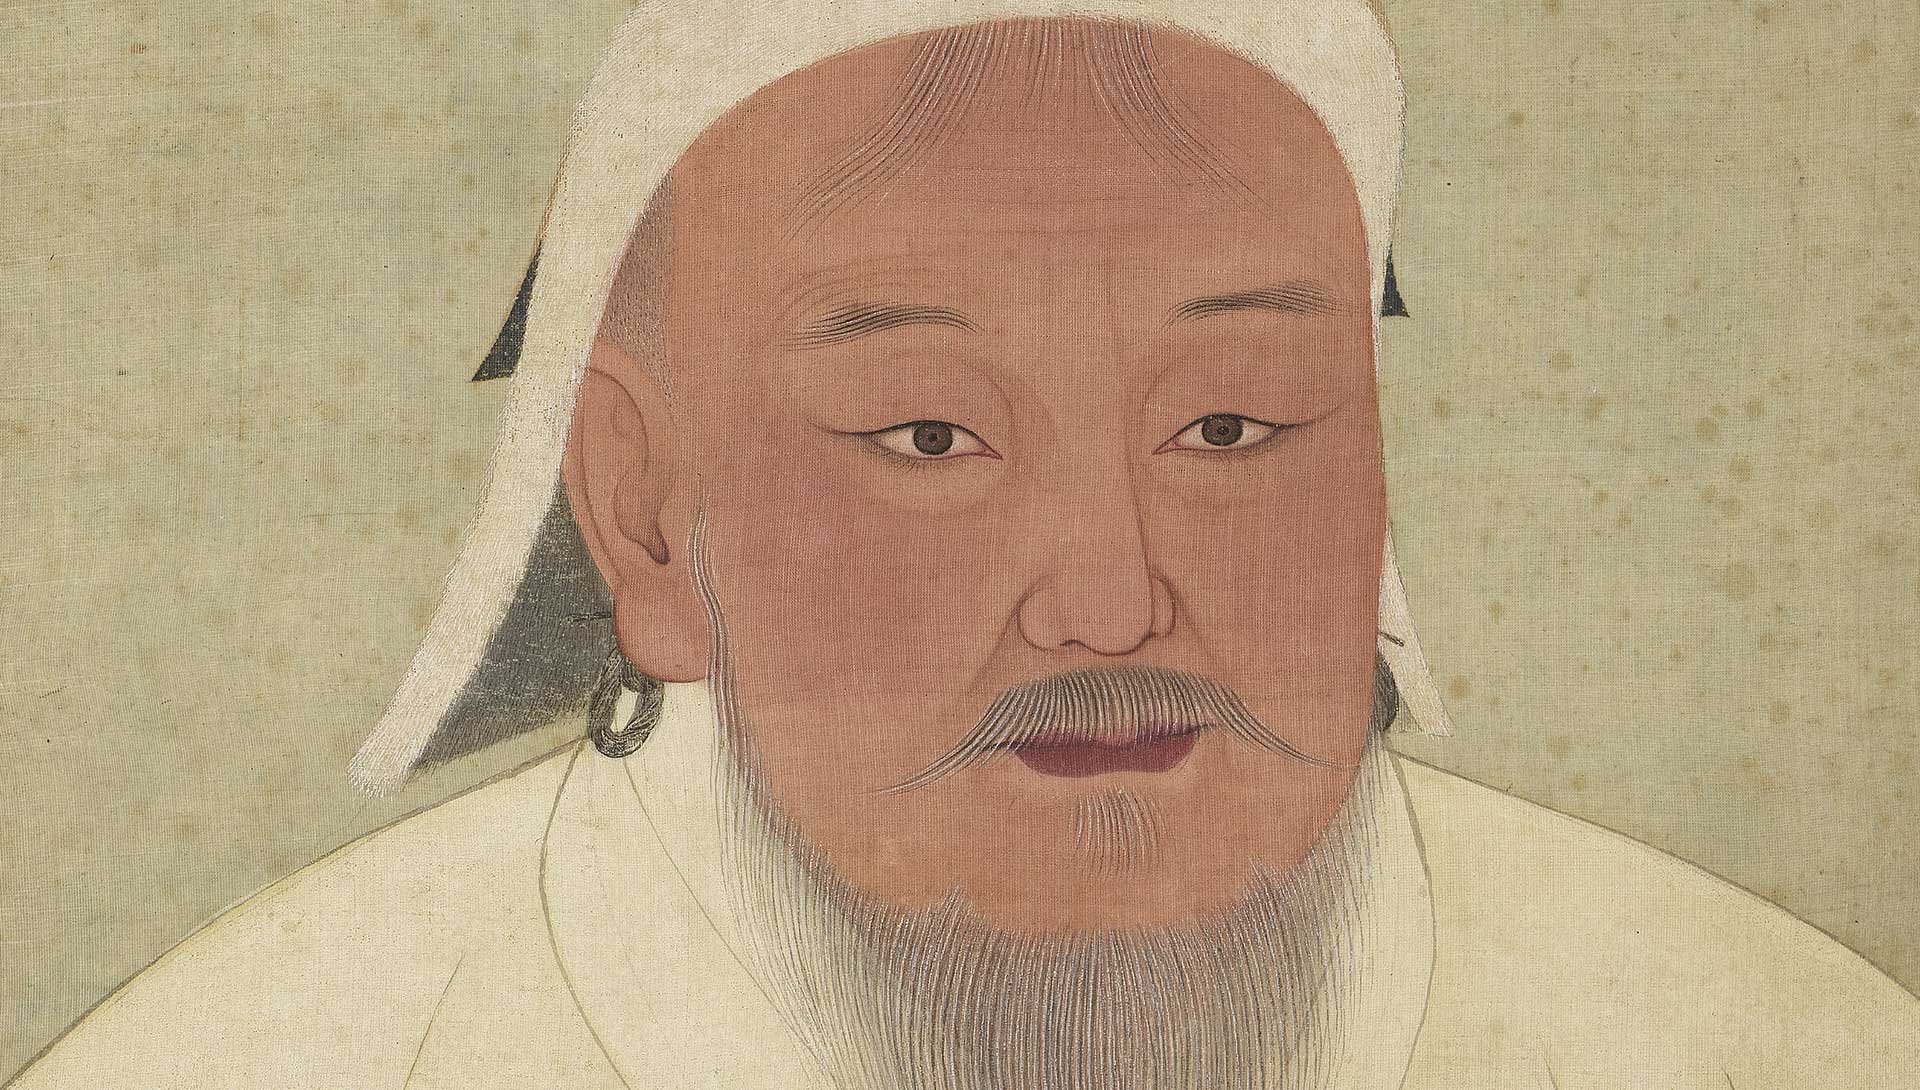 Blood, Battle, & Conquest: How Genghis Khan Forged the Mongol Empire